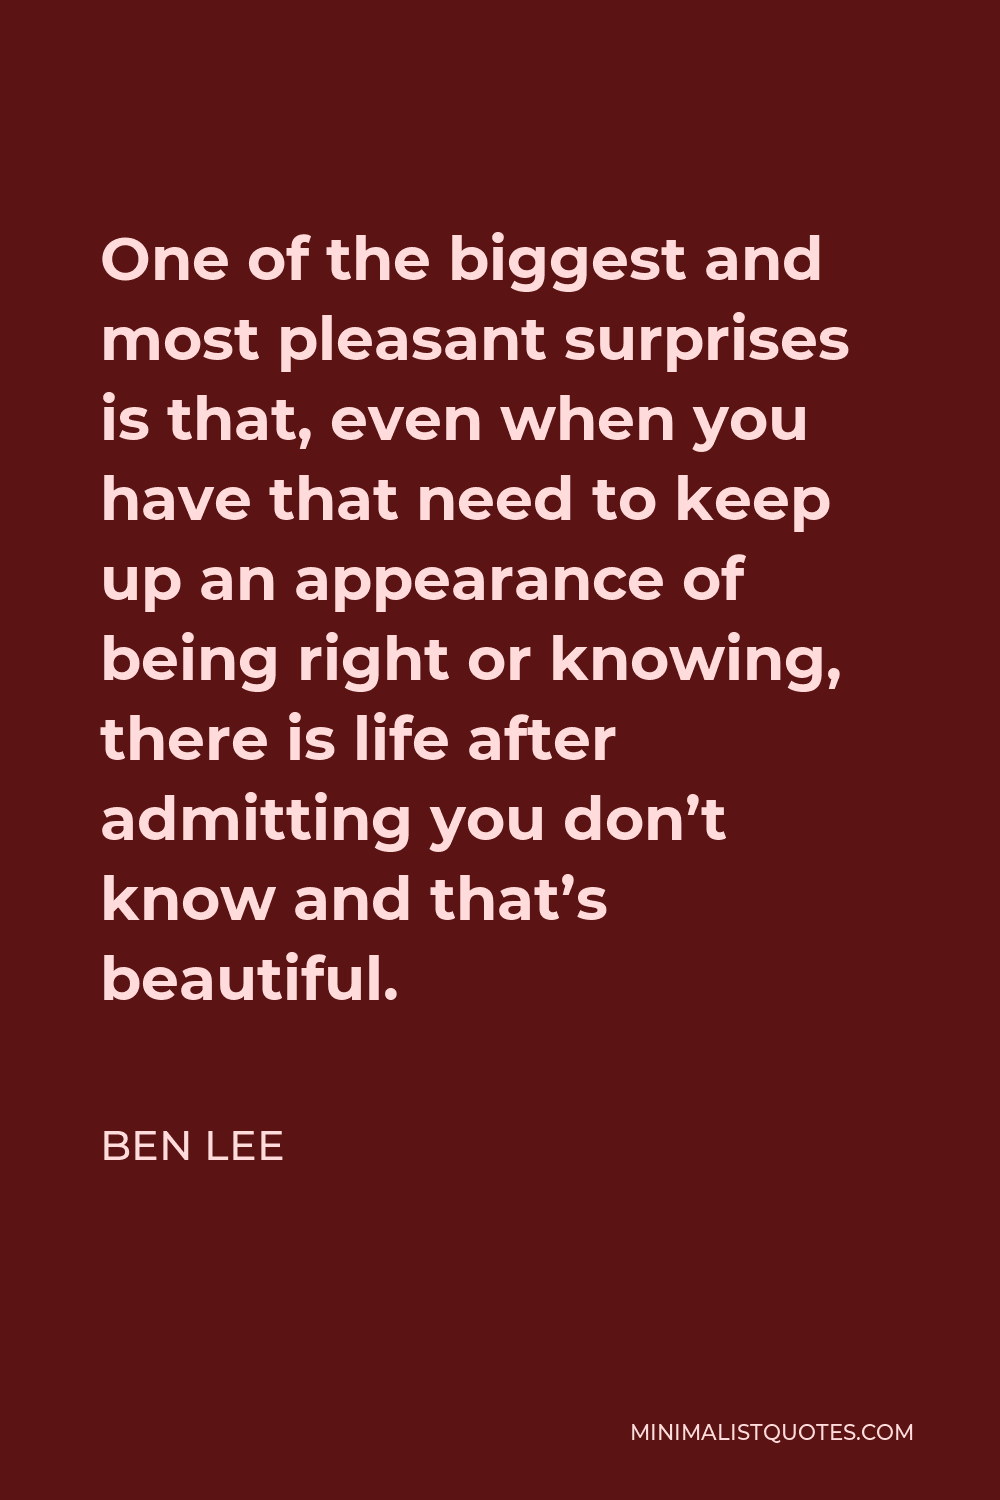 Ben Lee Quote - One of the biggest and most pleasant surprises is that, even when you have that need to keep up an appearance of being right or knowing, there is life after admitting you don’t know and that’s beautiful.